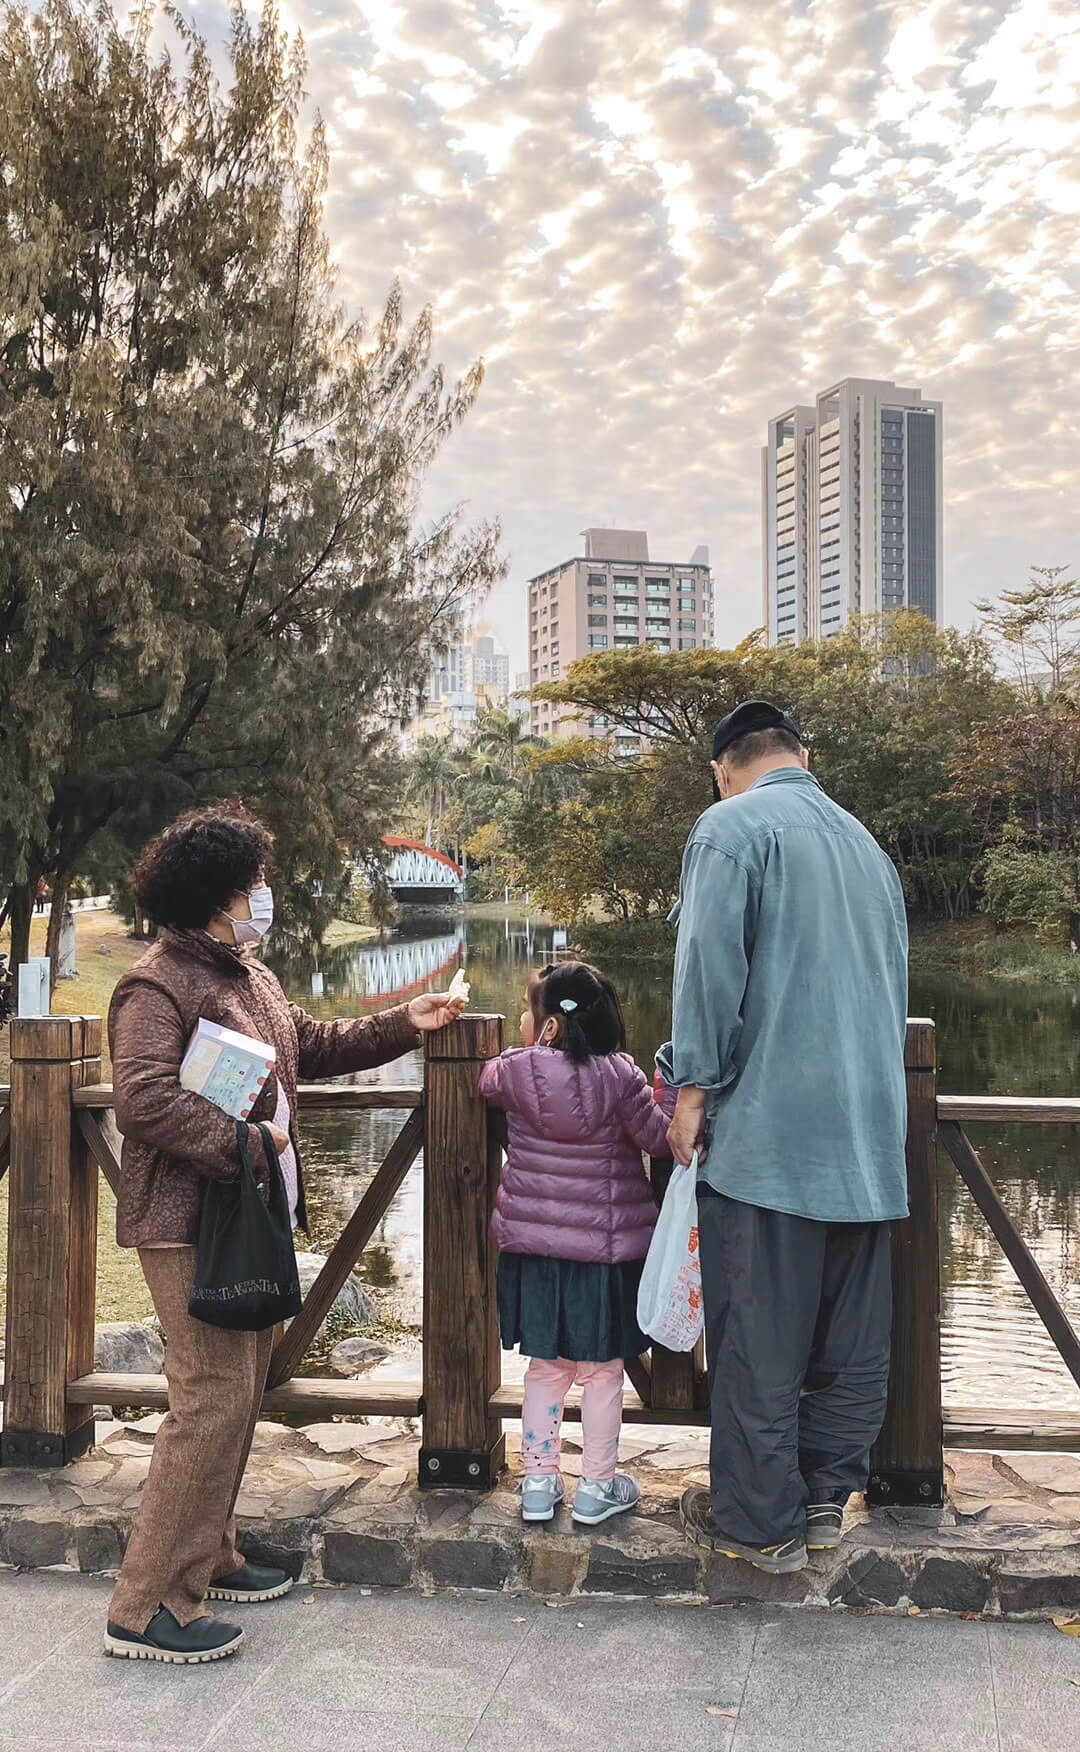 A back view of an old woman and old man next to a small girl